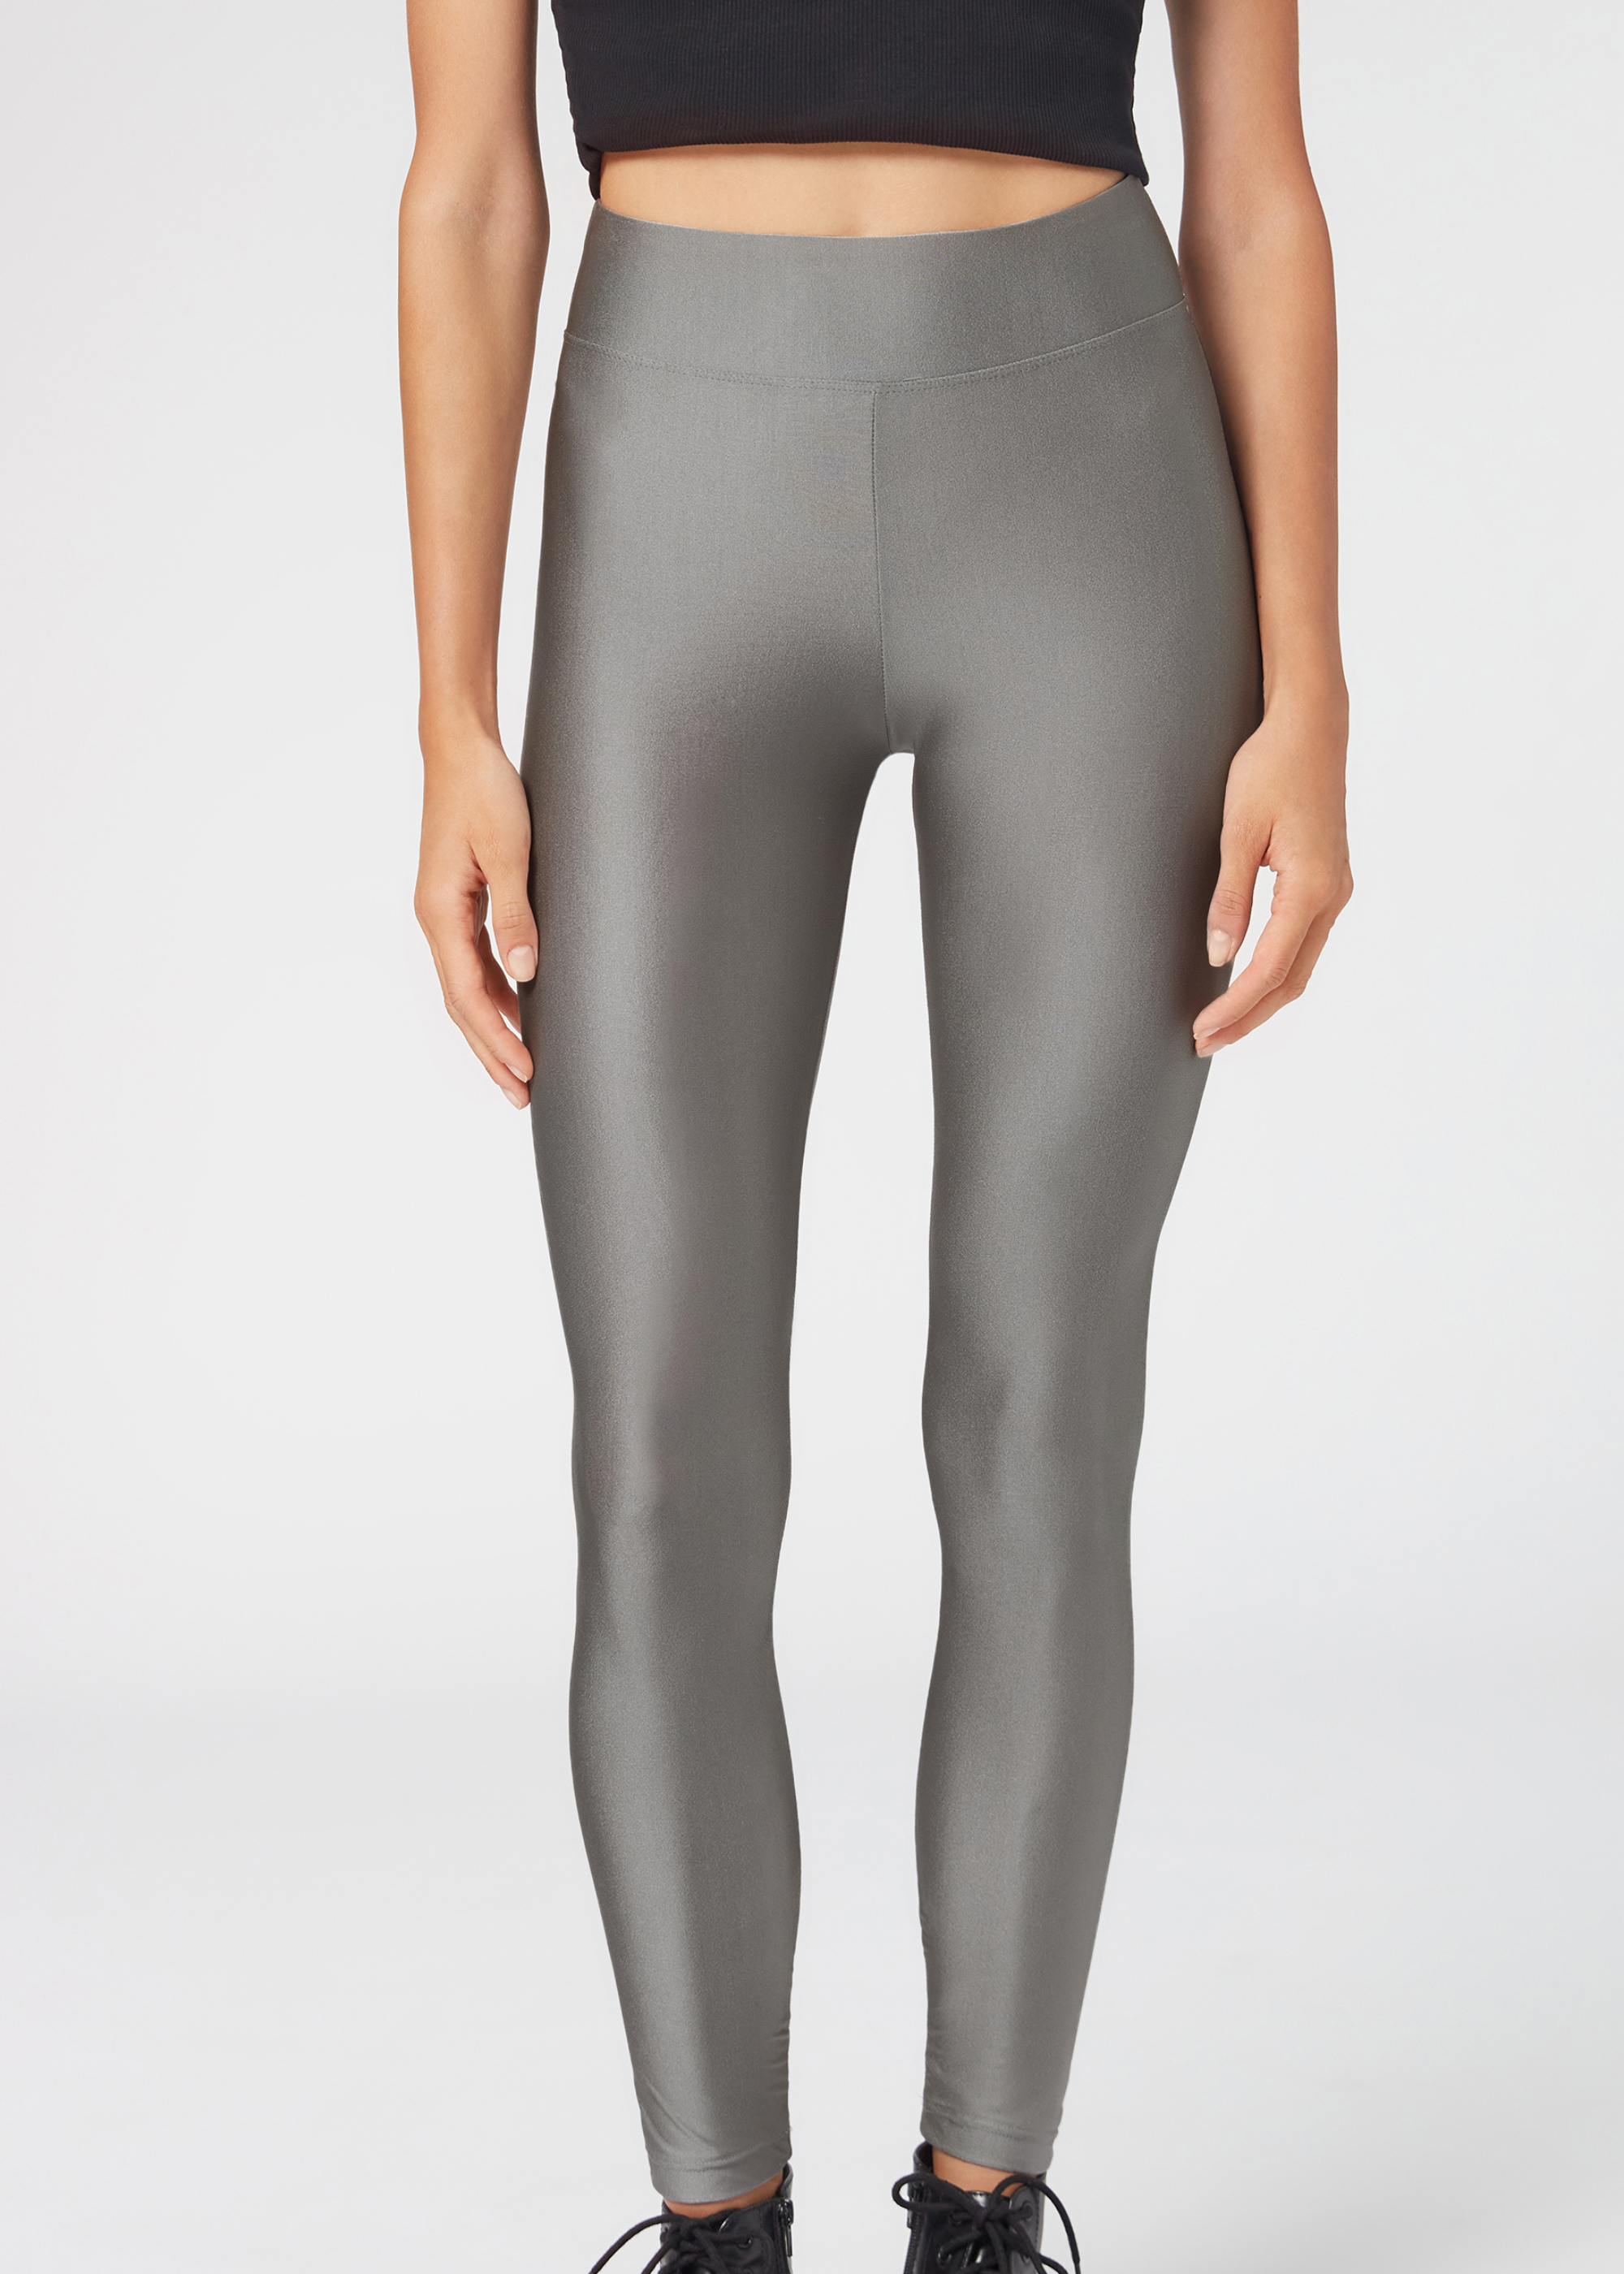 Extra 25% Off for Members: 100s of Styles Added Little Kids (4 - 7) Grey  Tights & Leggings.